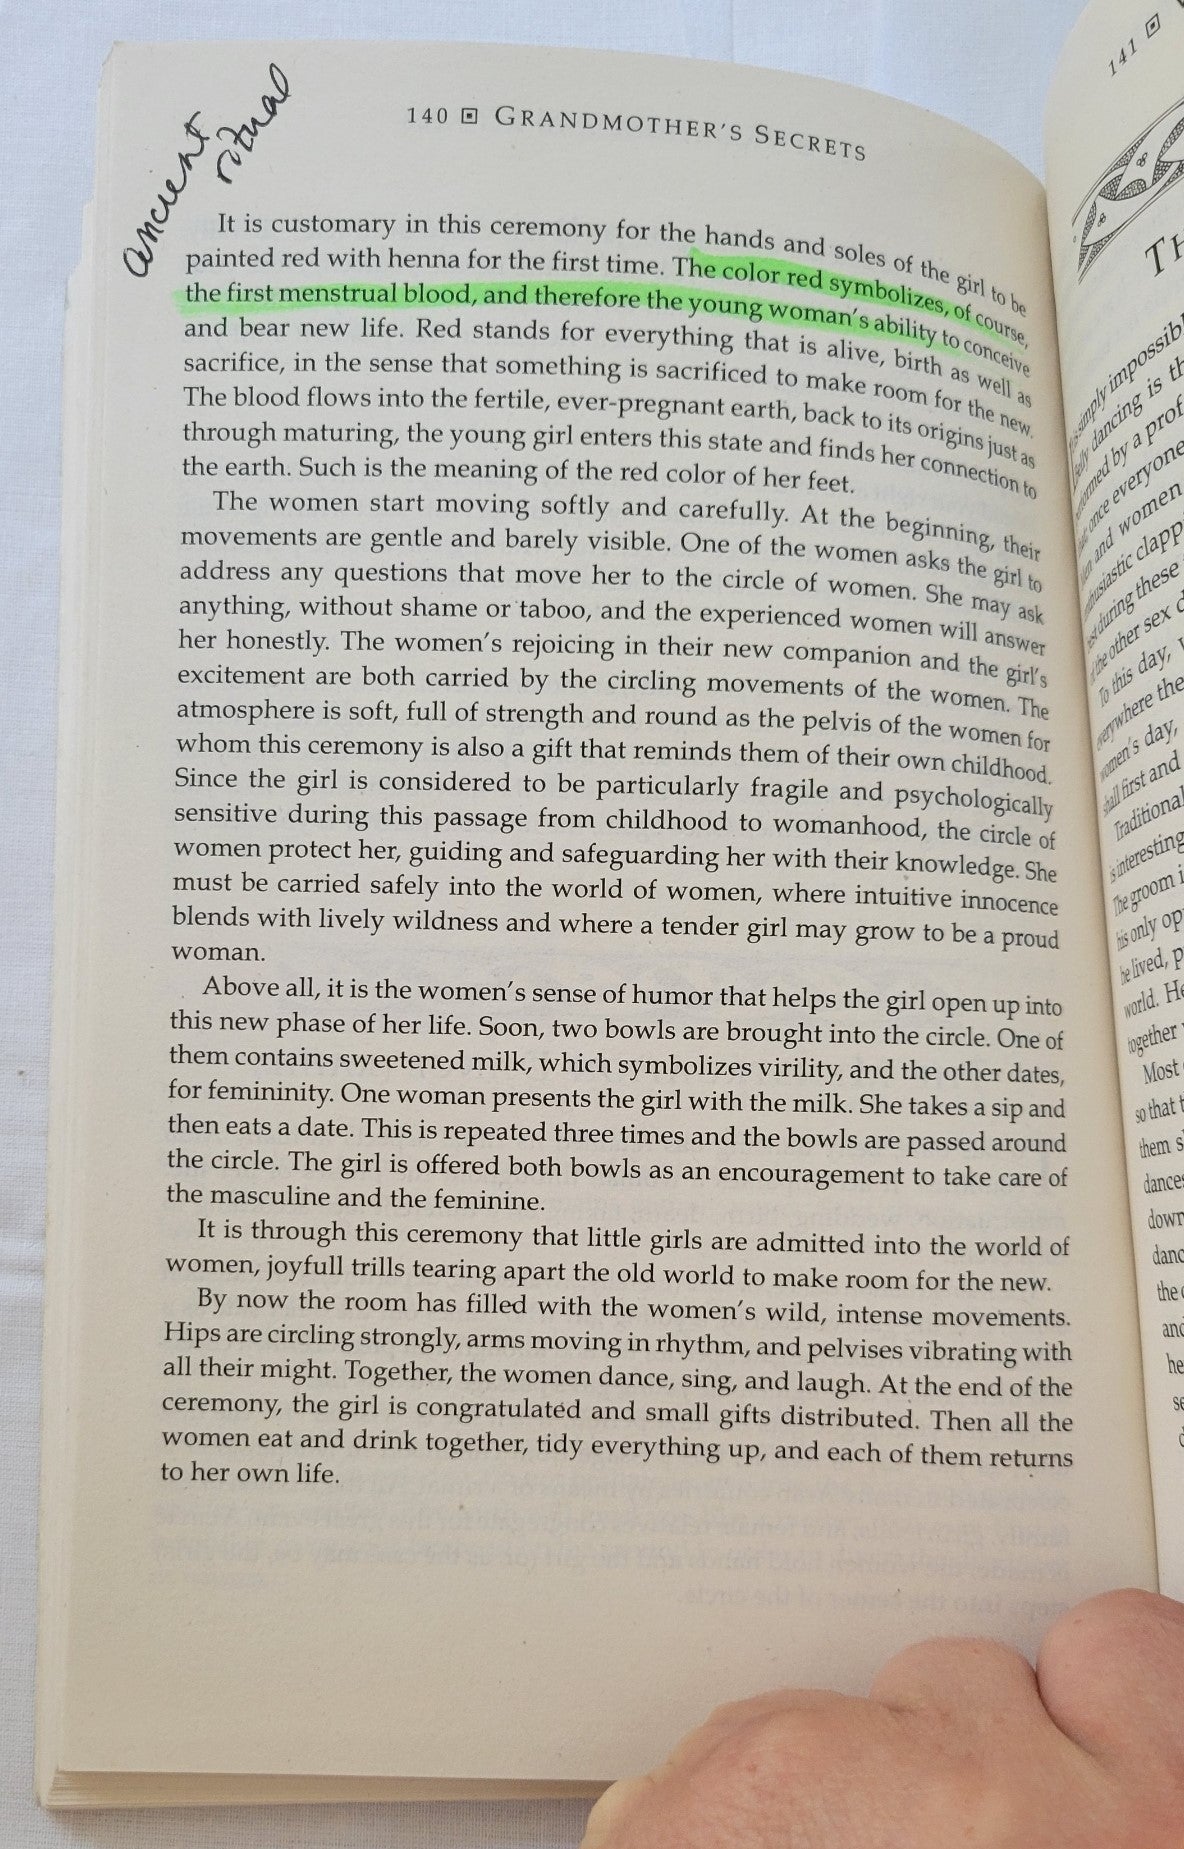 Used book for sale “Grandmother's Secrets: The Ancient Rituals and Healing Power of Belly Dancing” written by Rosina-Fawzia Al-Rawi, translated by Monique Arav.  View of page 140 with note and hightlight.